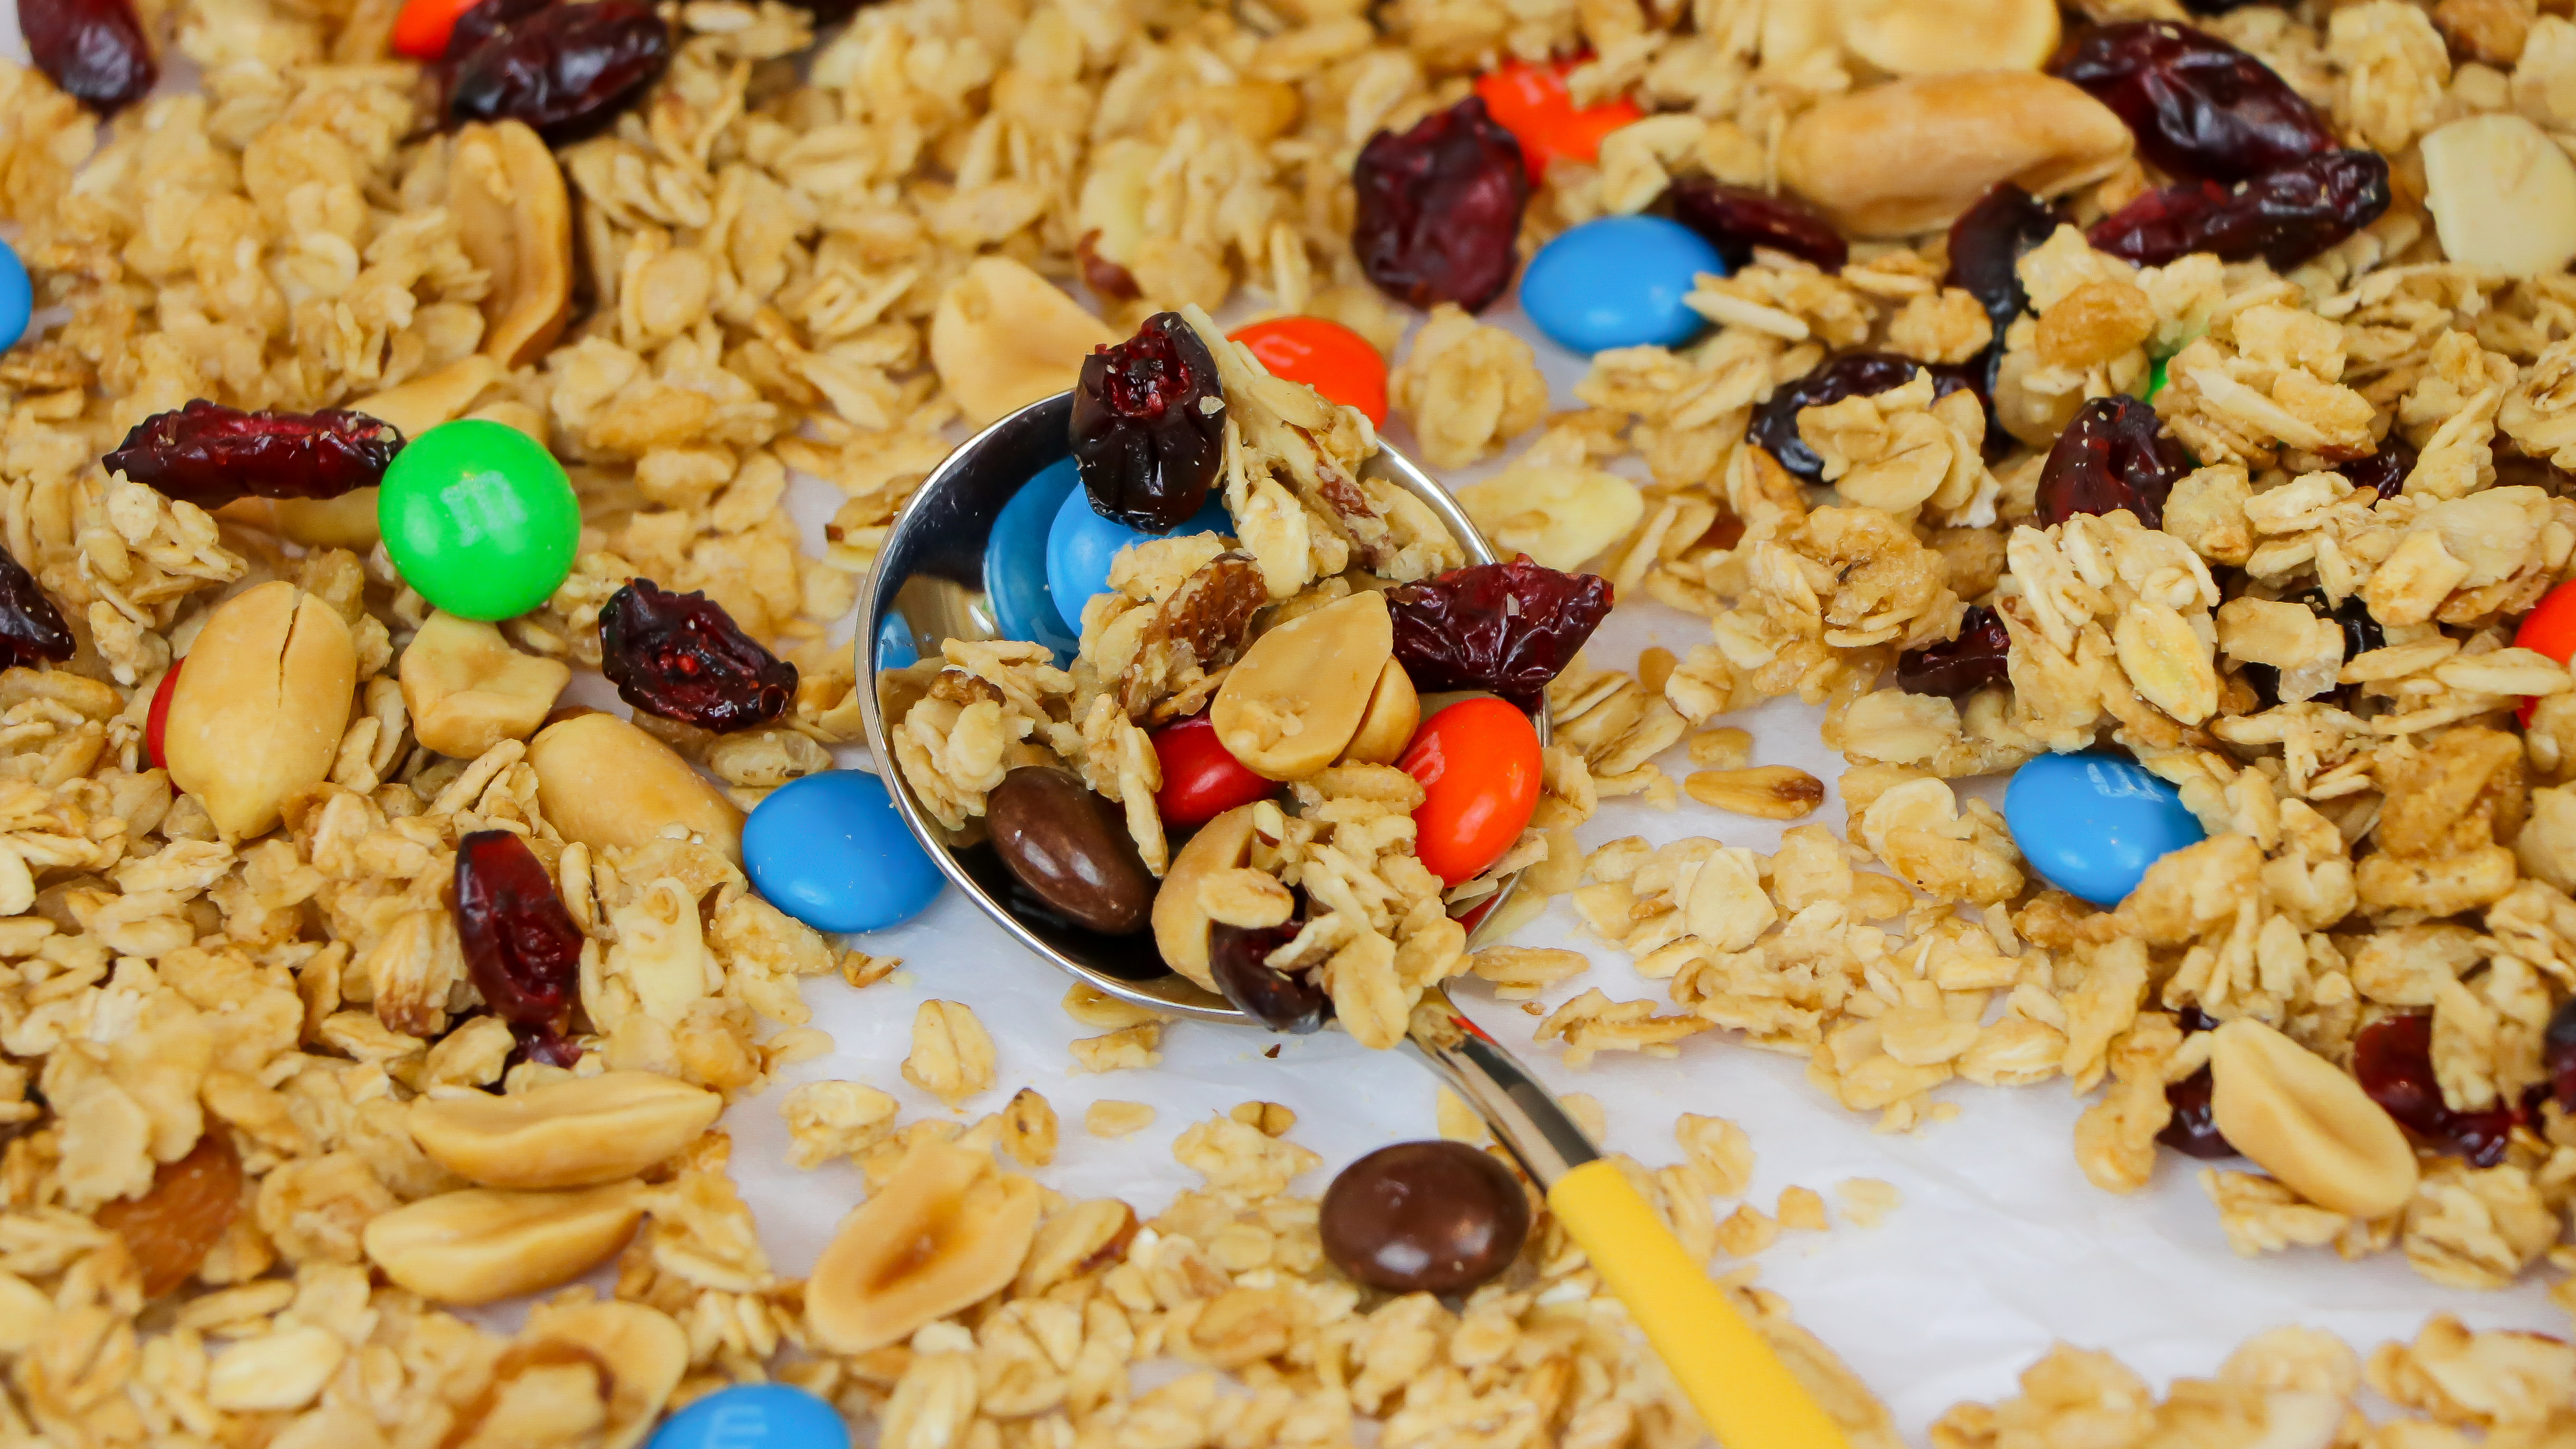 Try a mixture of granola bars, MnM's, raisins, and nuts